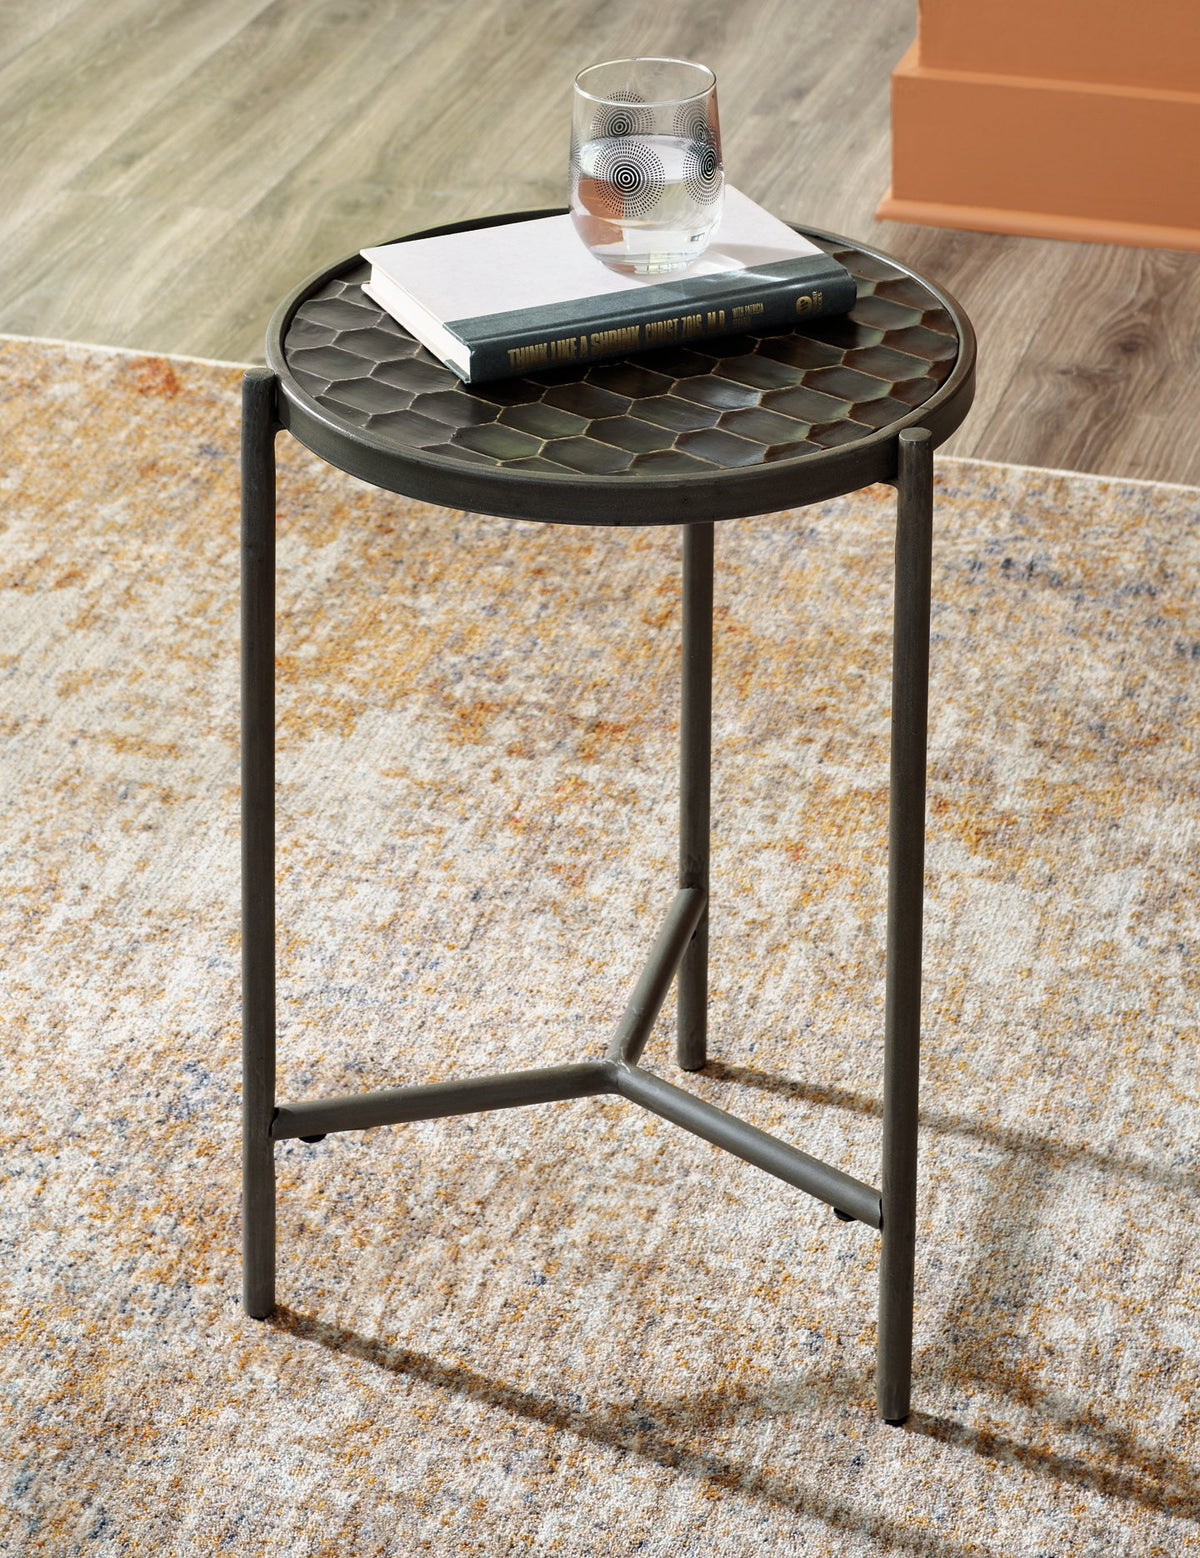 Doraley Chairside End Table  Las Vegas Furniture Stores